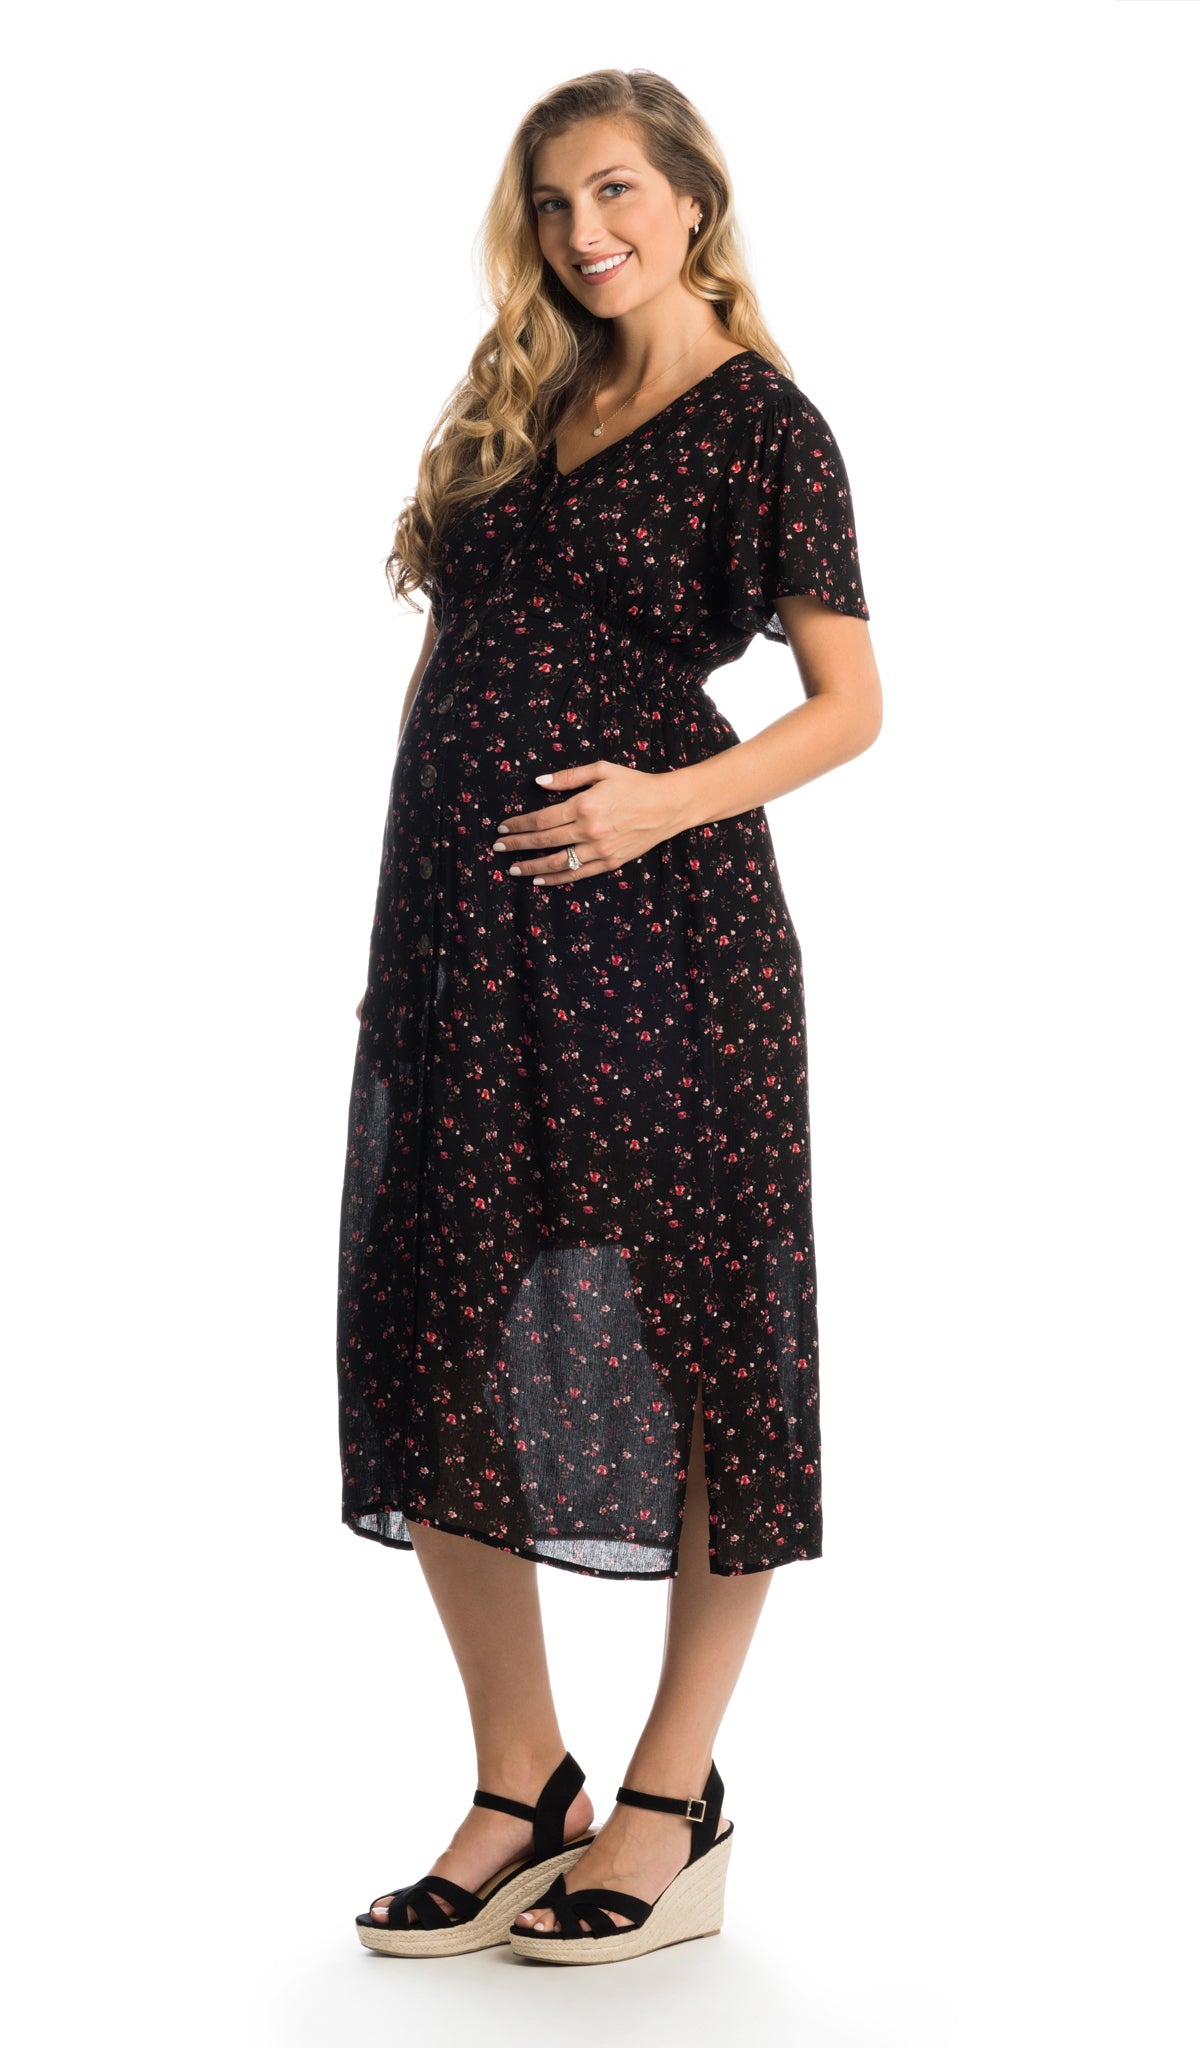 Black Floral Ballencia dress worn by pregnant woman with one hand on belly.